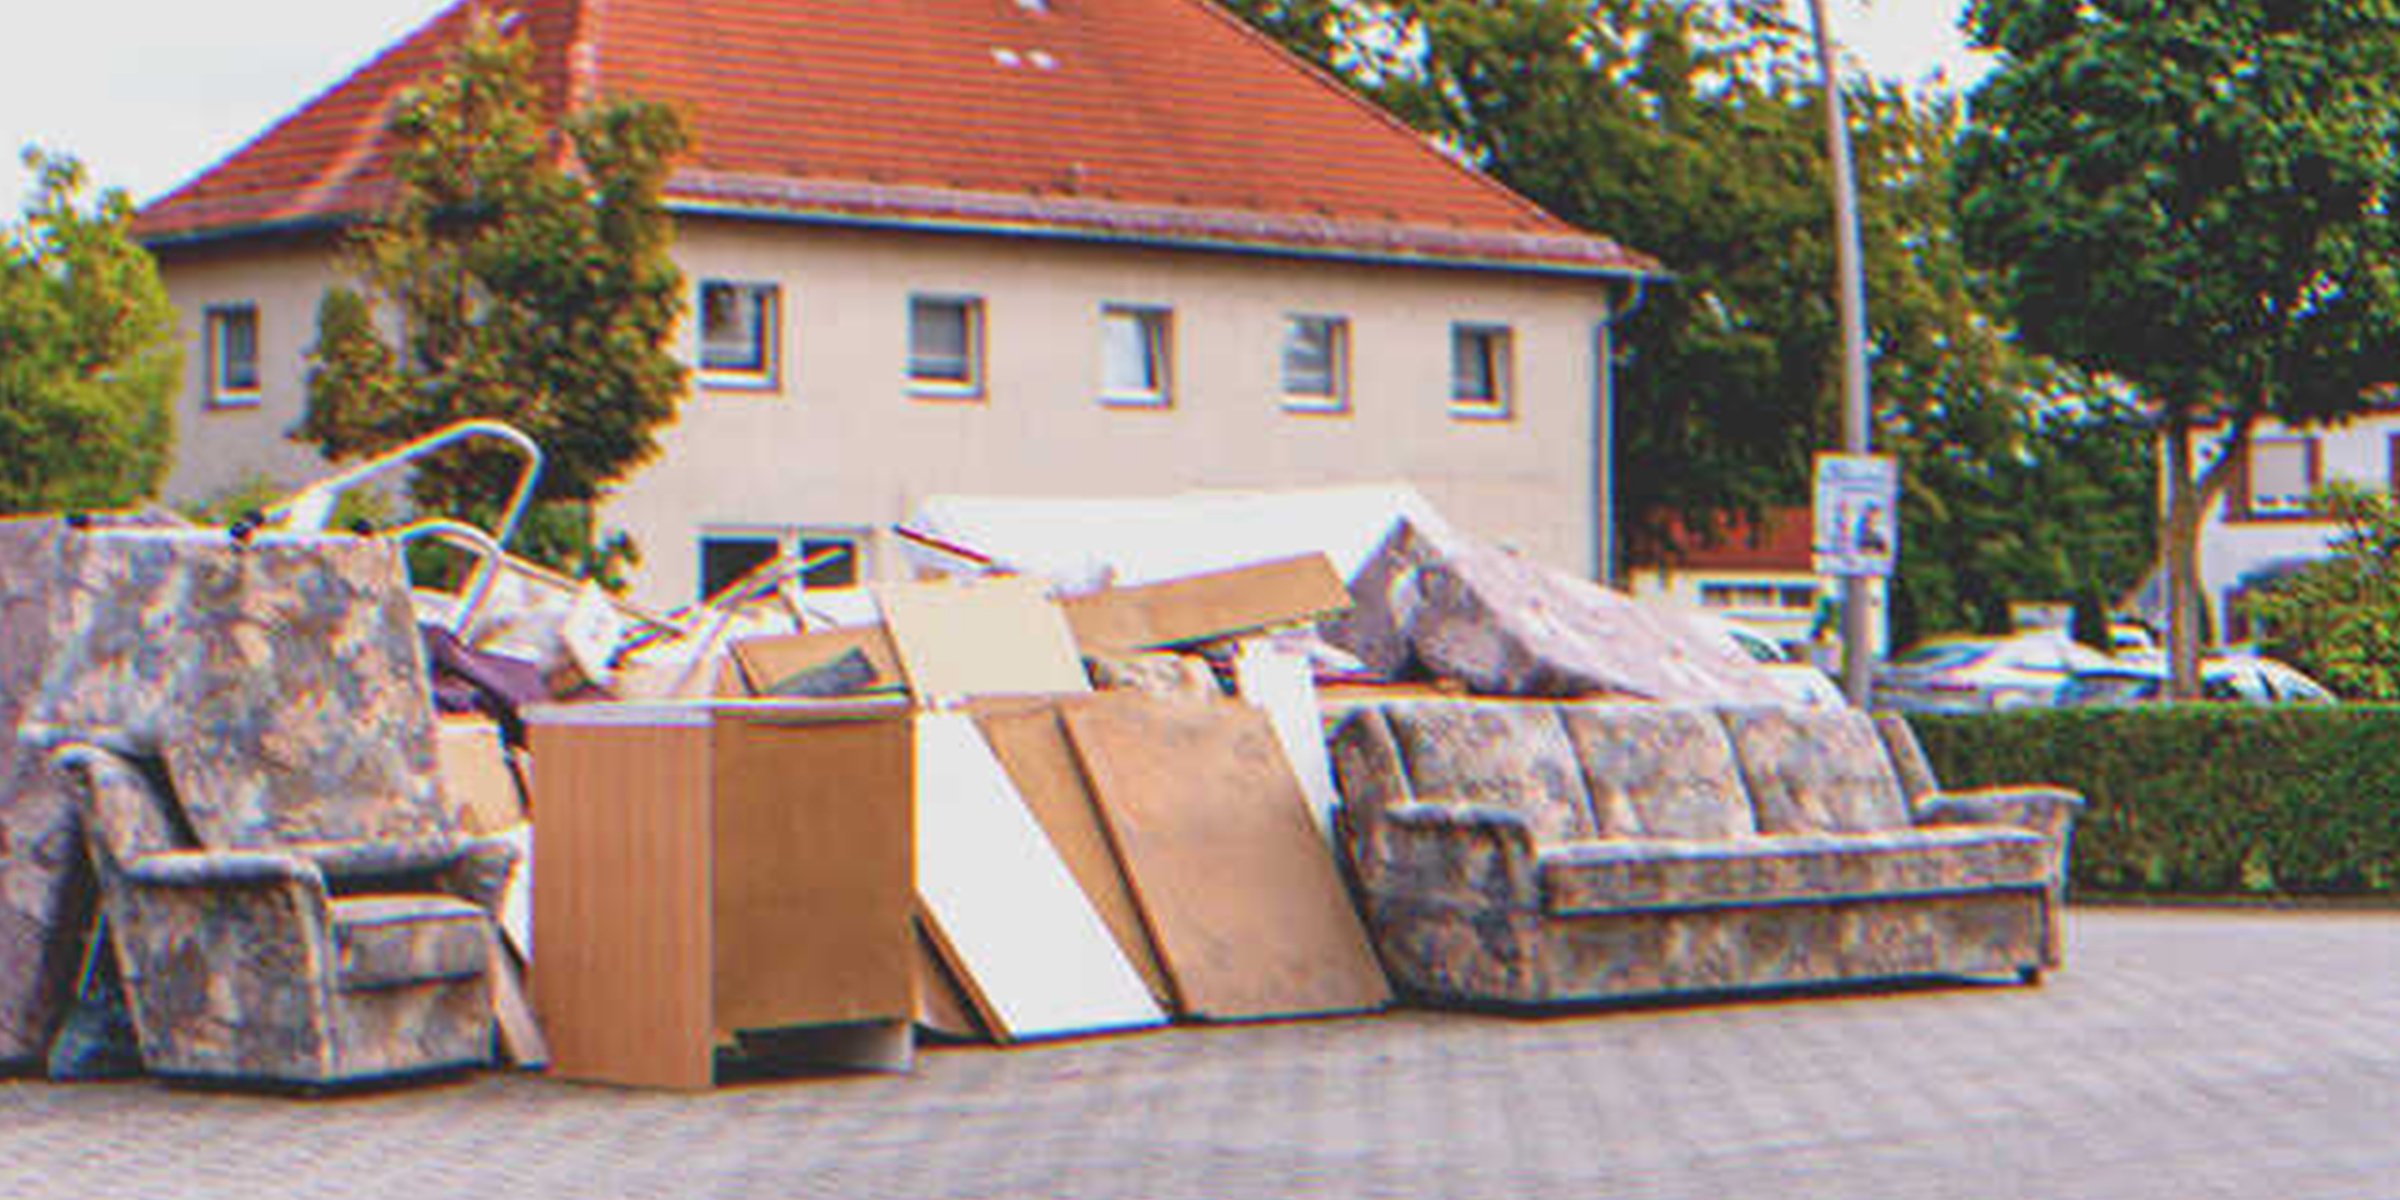 Furniture outside of a house | Source: Shutterstock